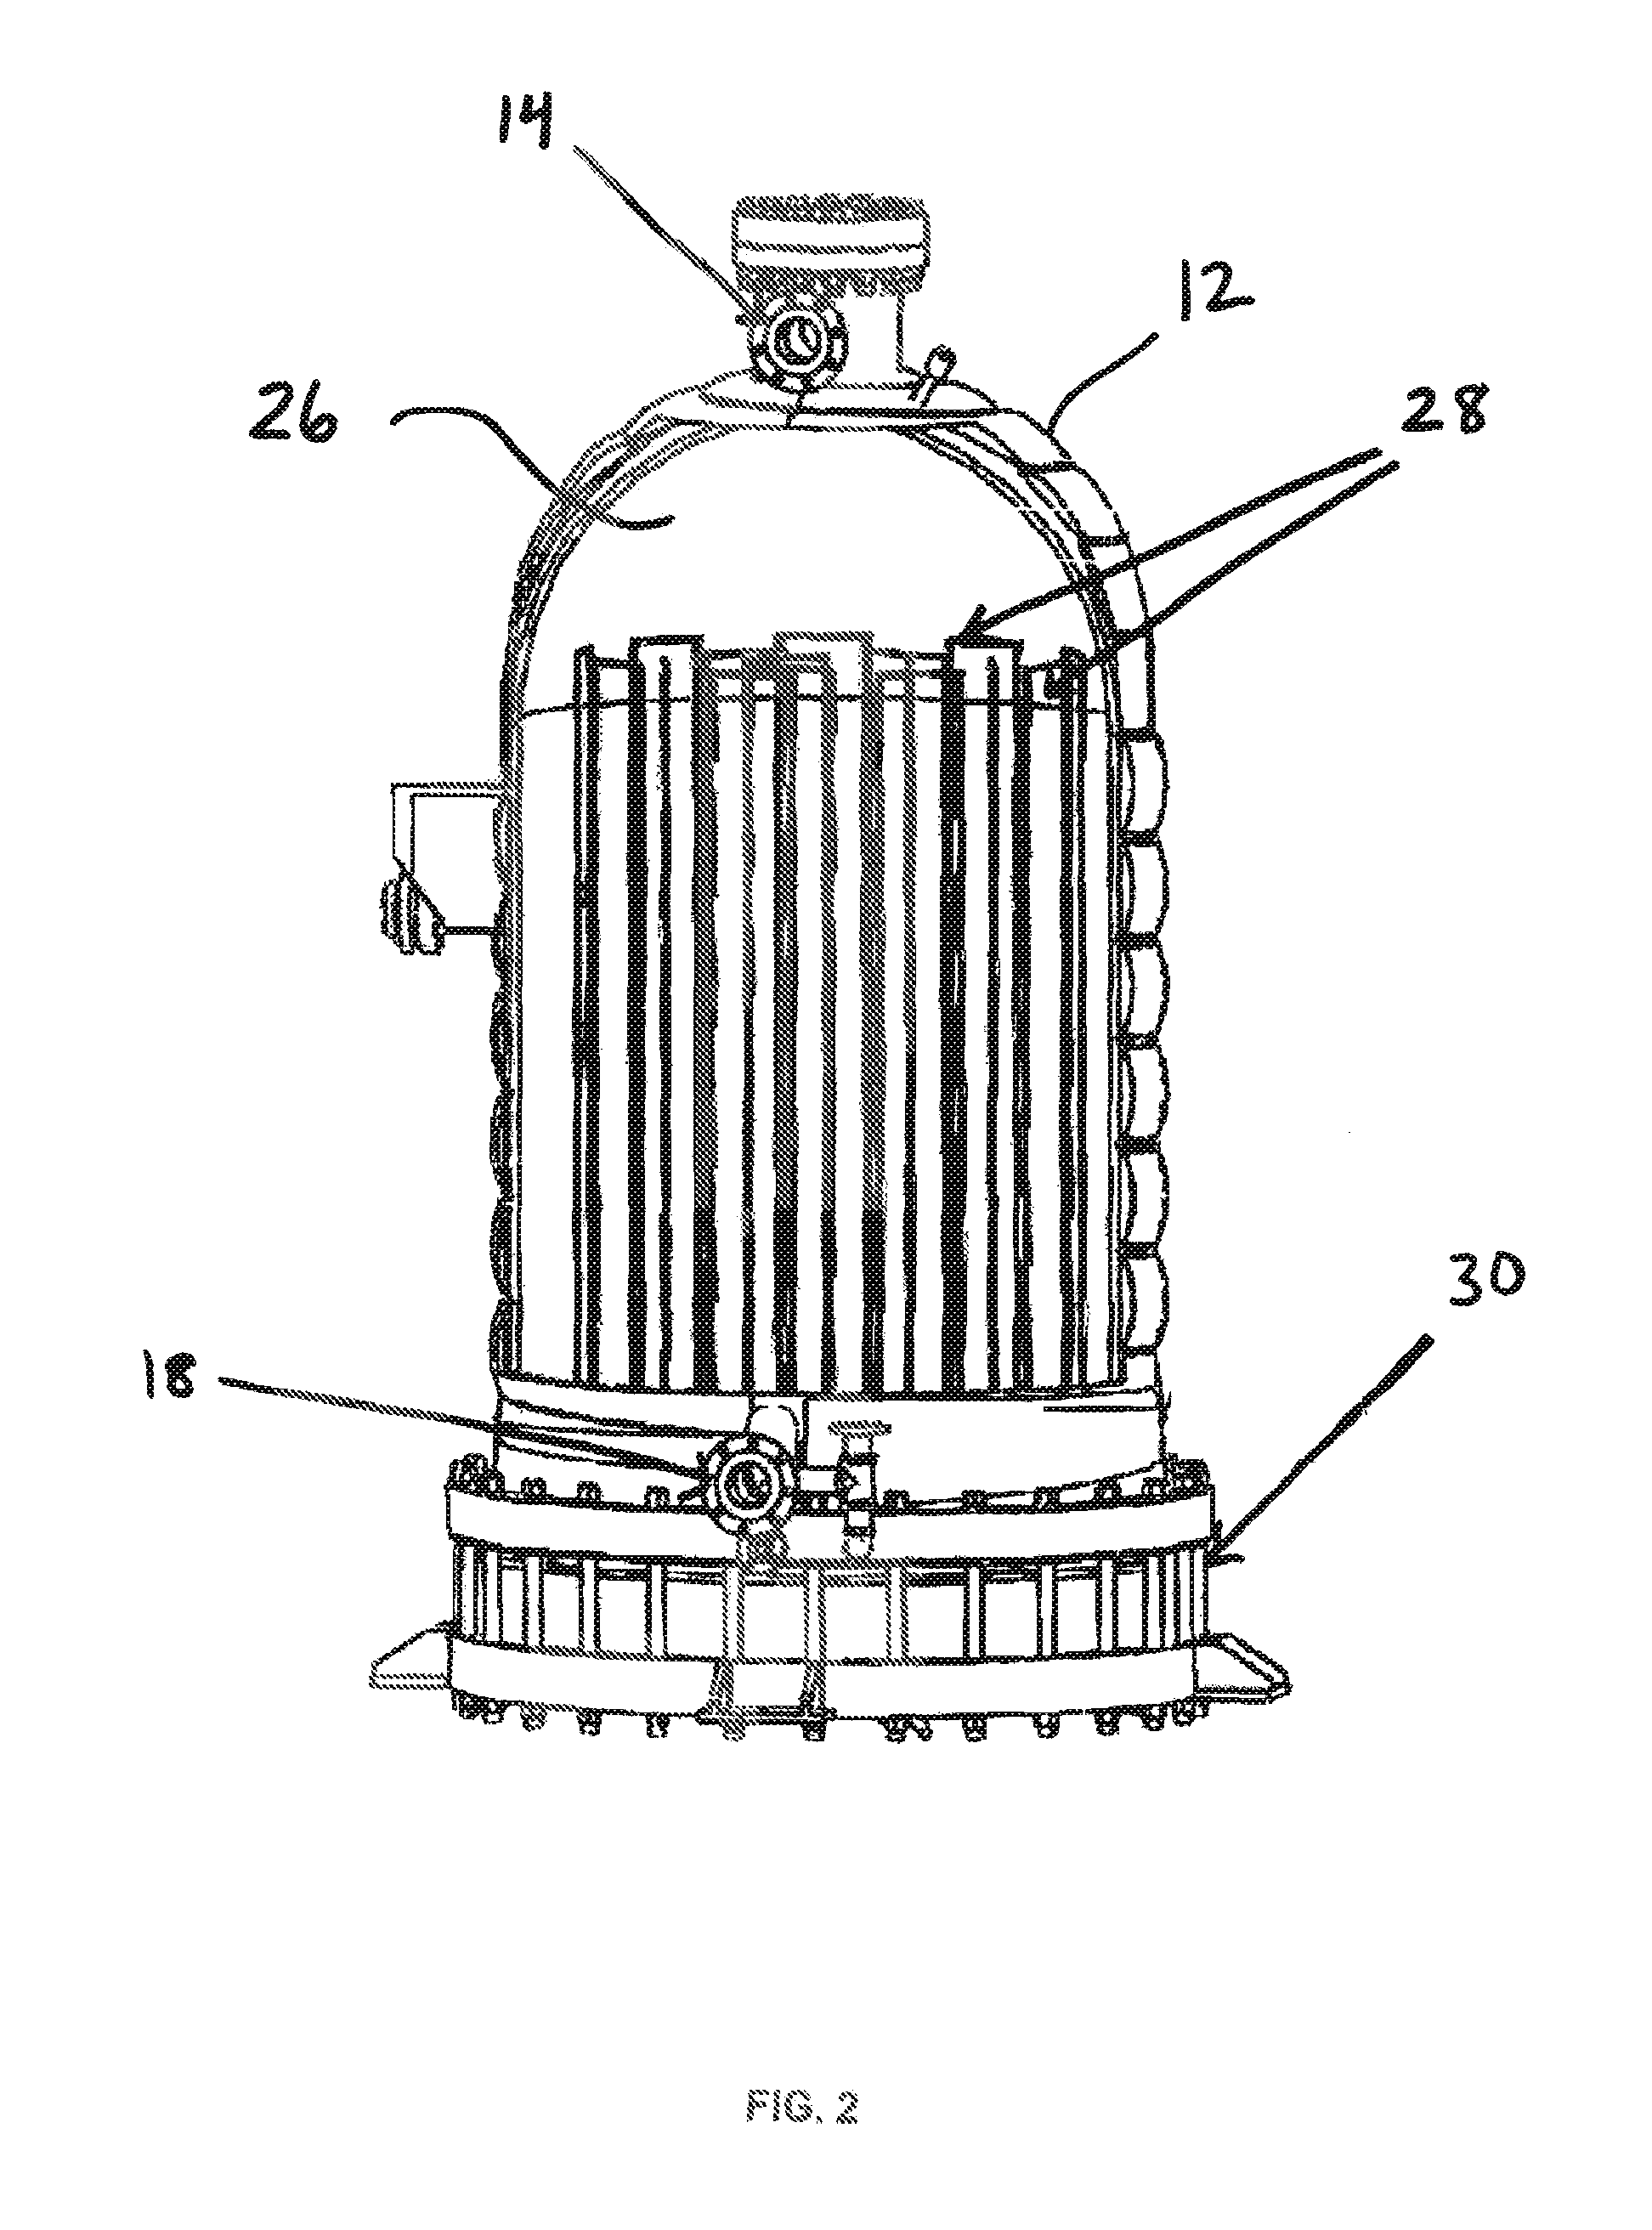 Gold-coated polysilicon reactor system and method